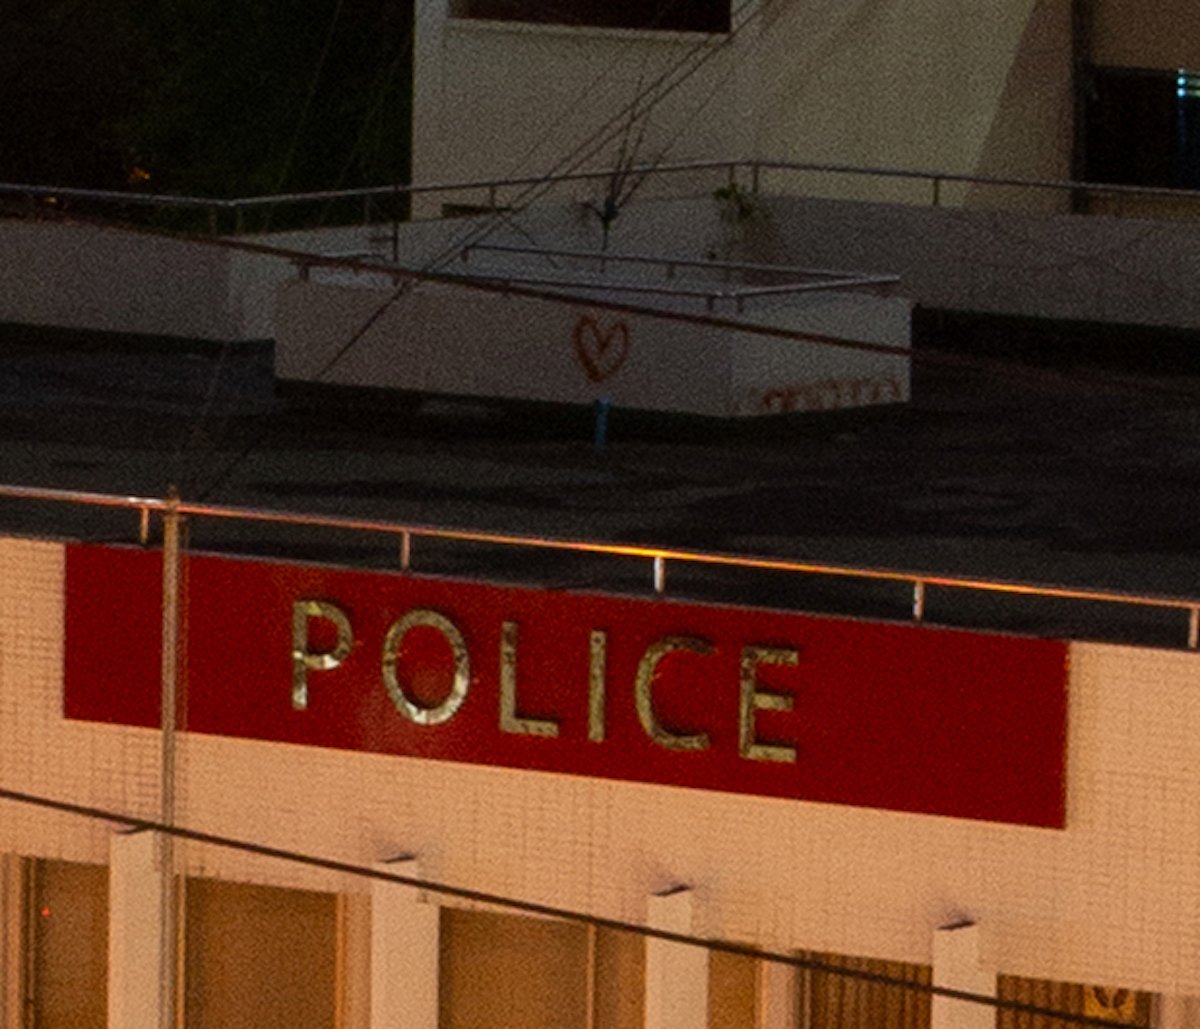 Unedited RAW image of rooftop and police sign